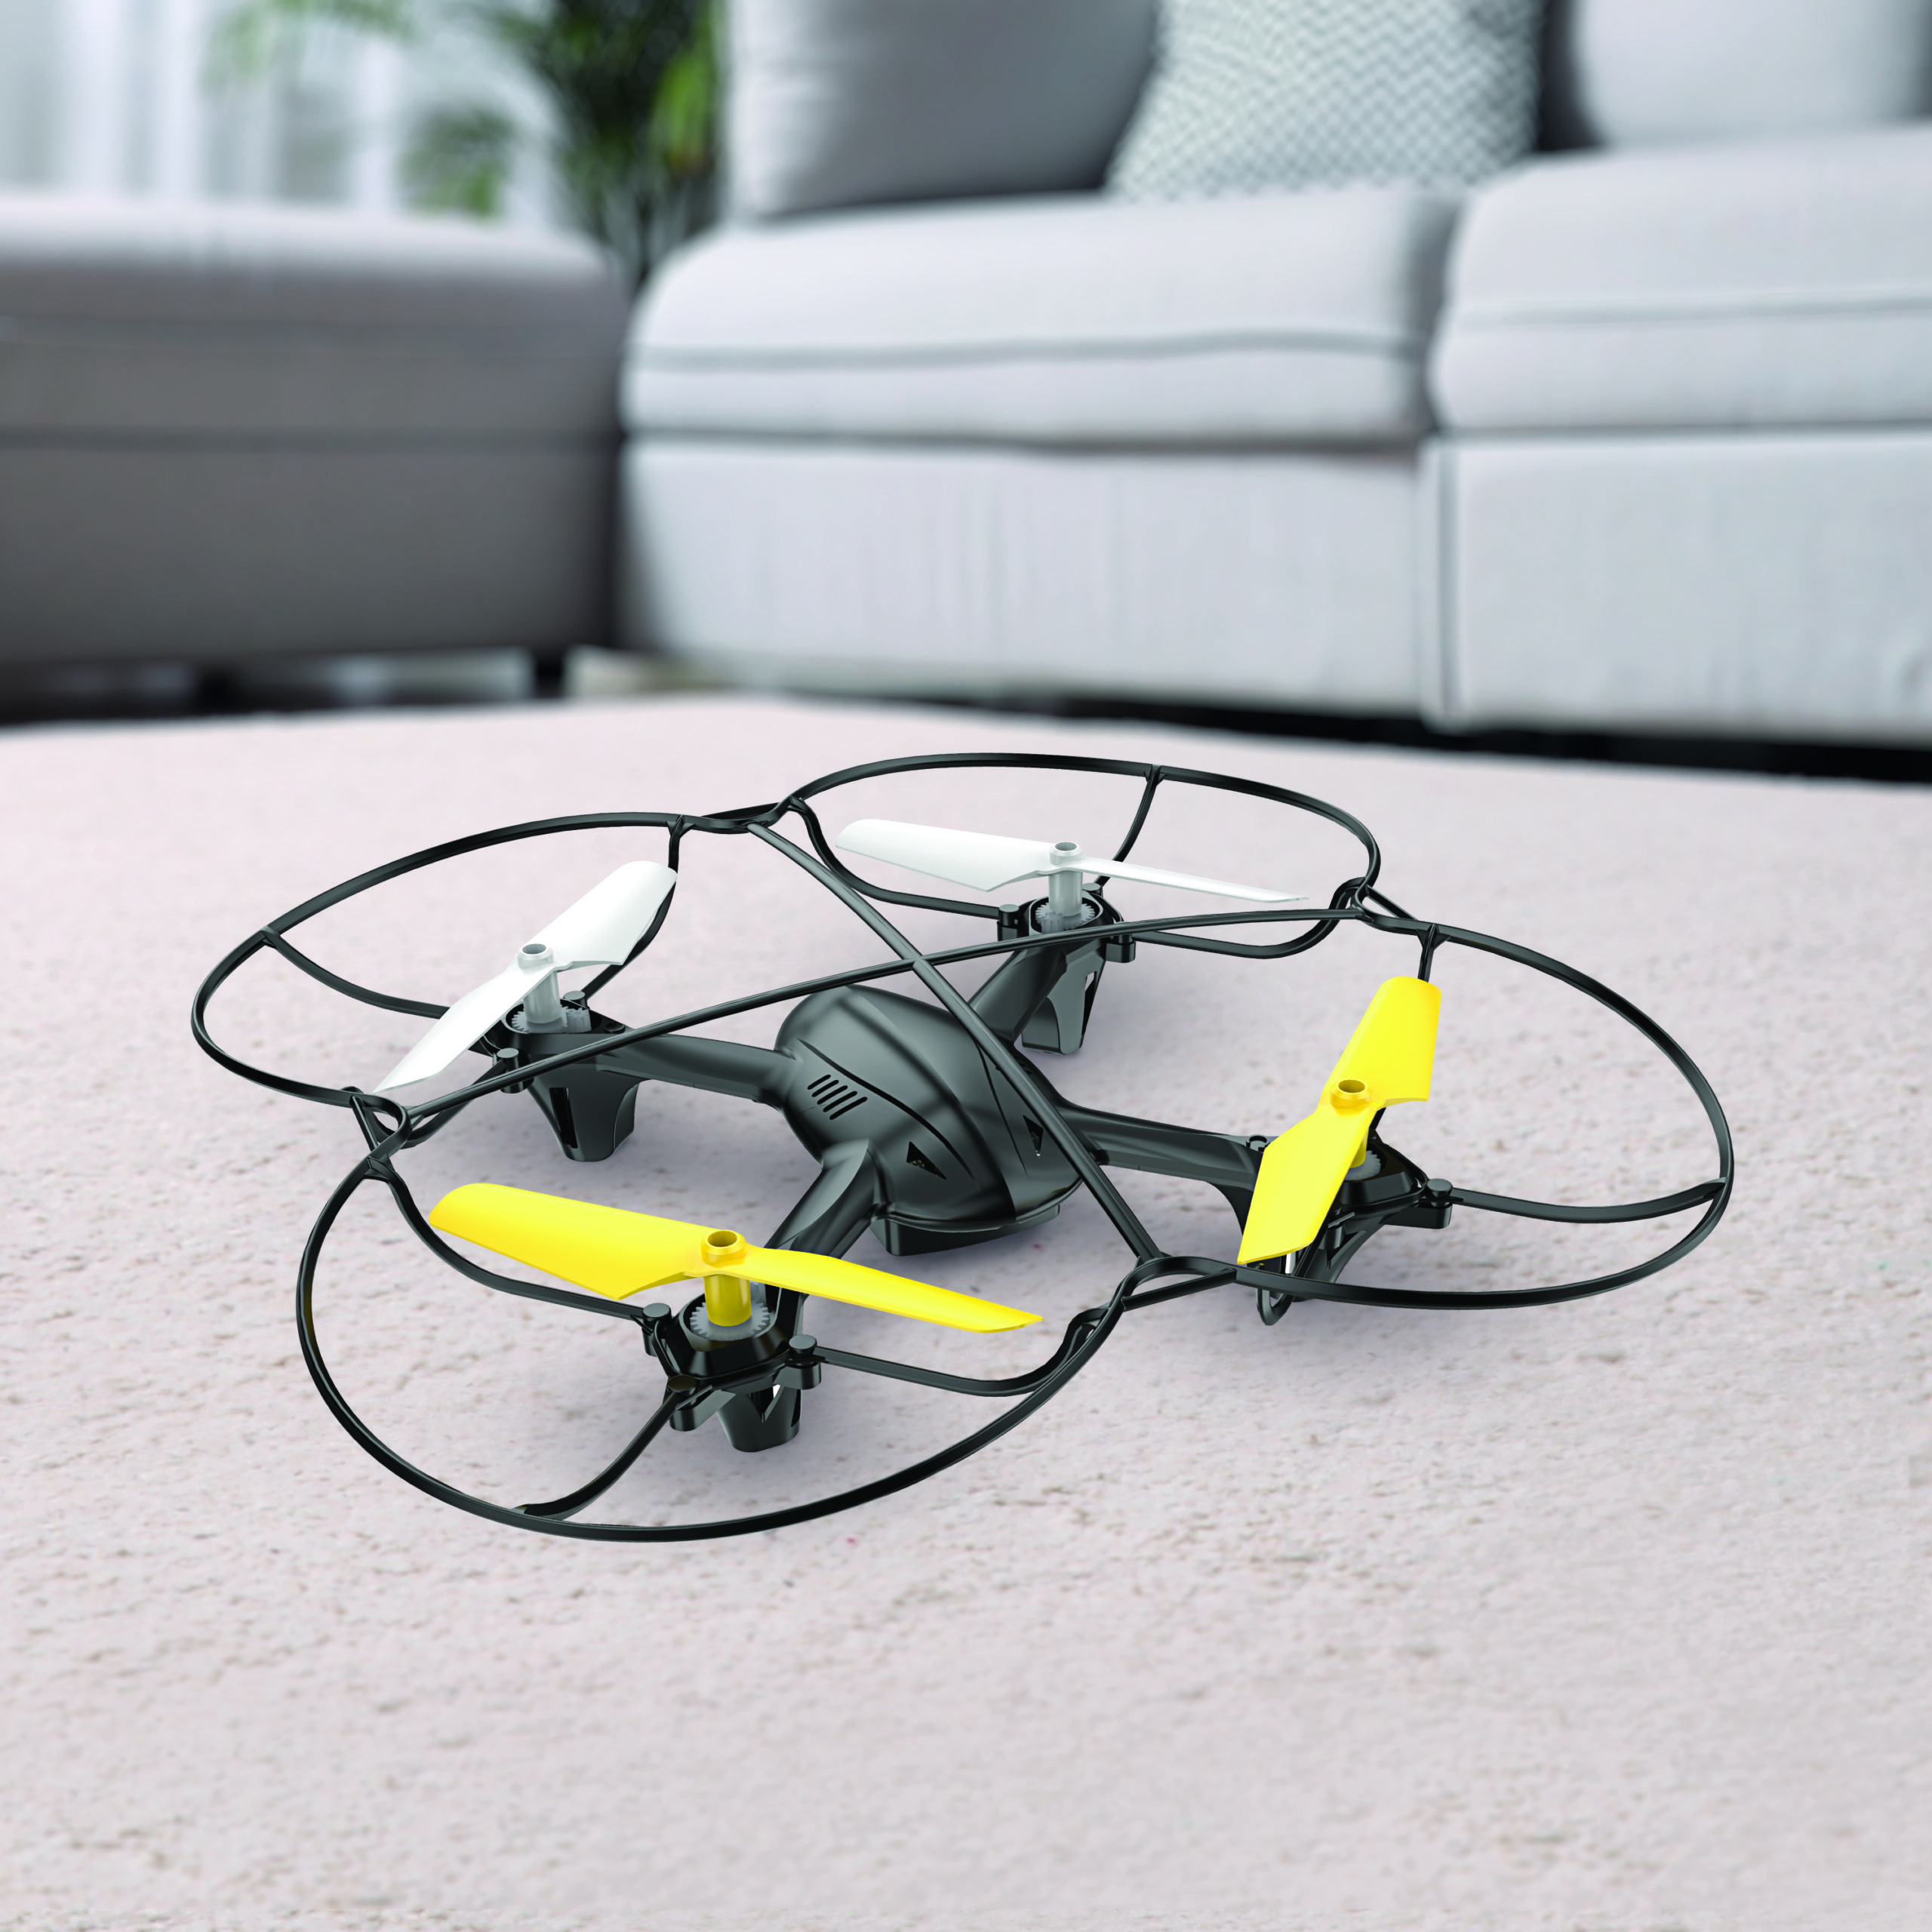 87985 - Motion Controller Drone - Lifestyle - WEB